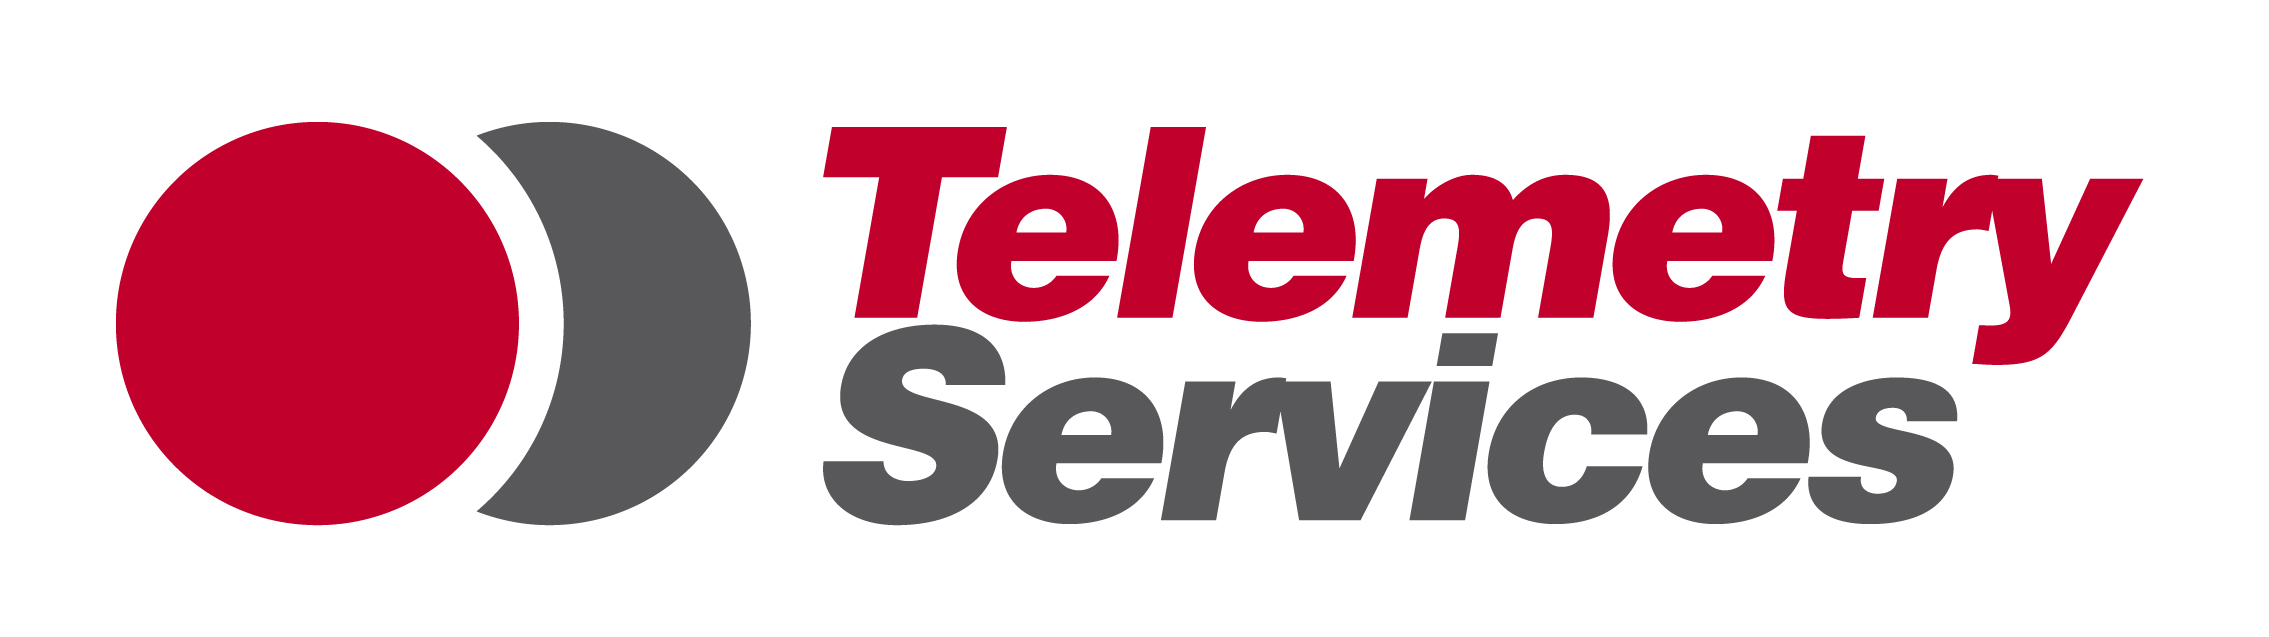 Dial Telecom provides telemetry services